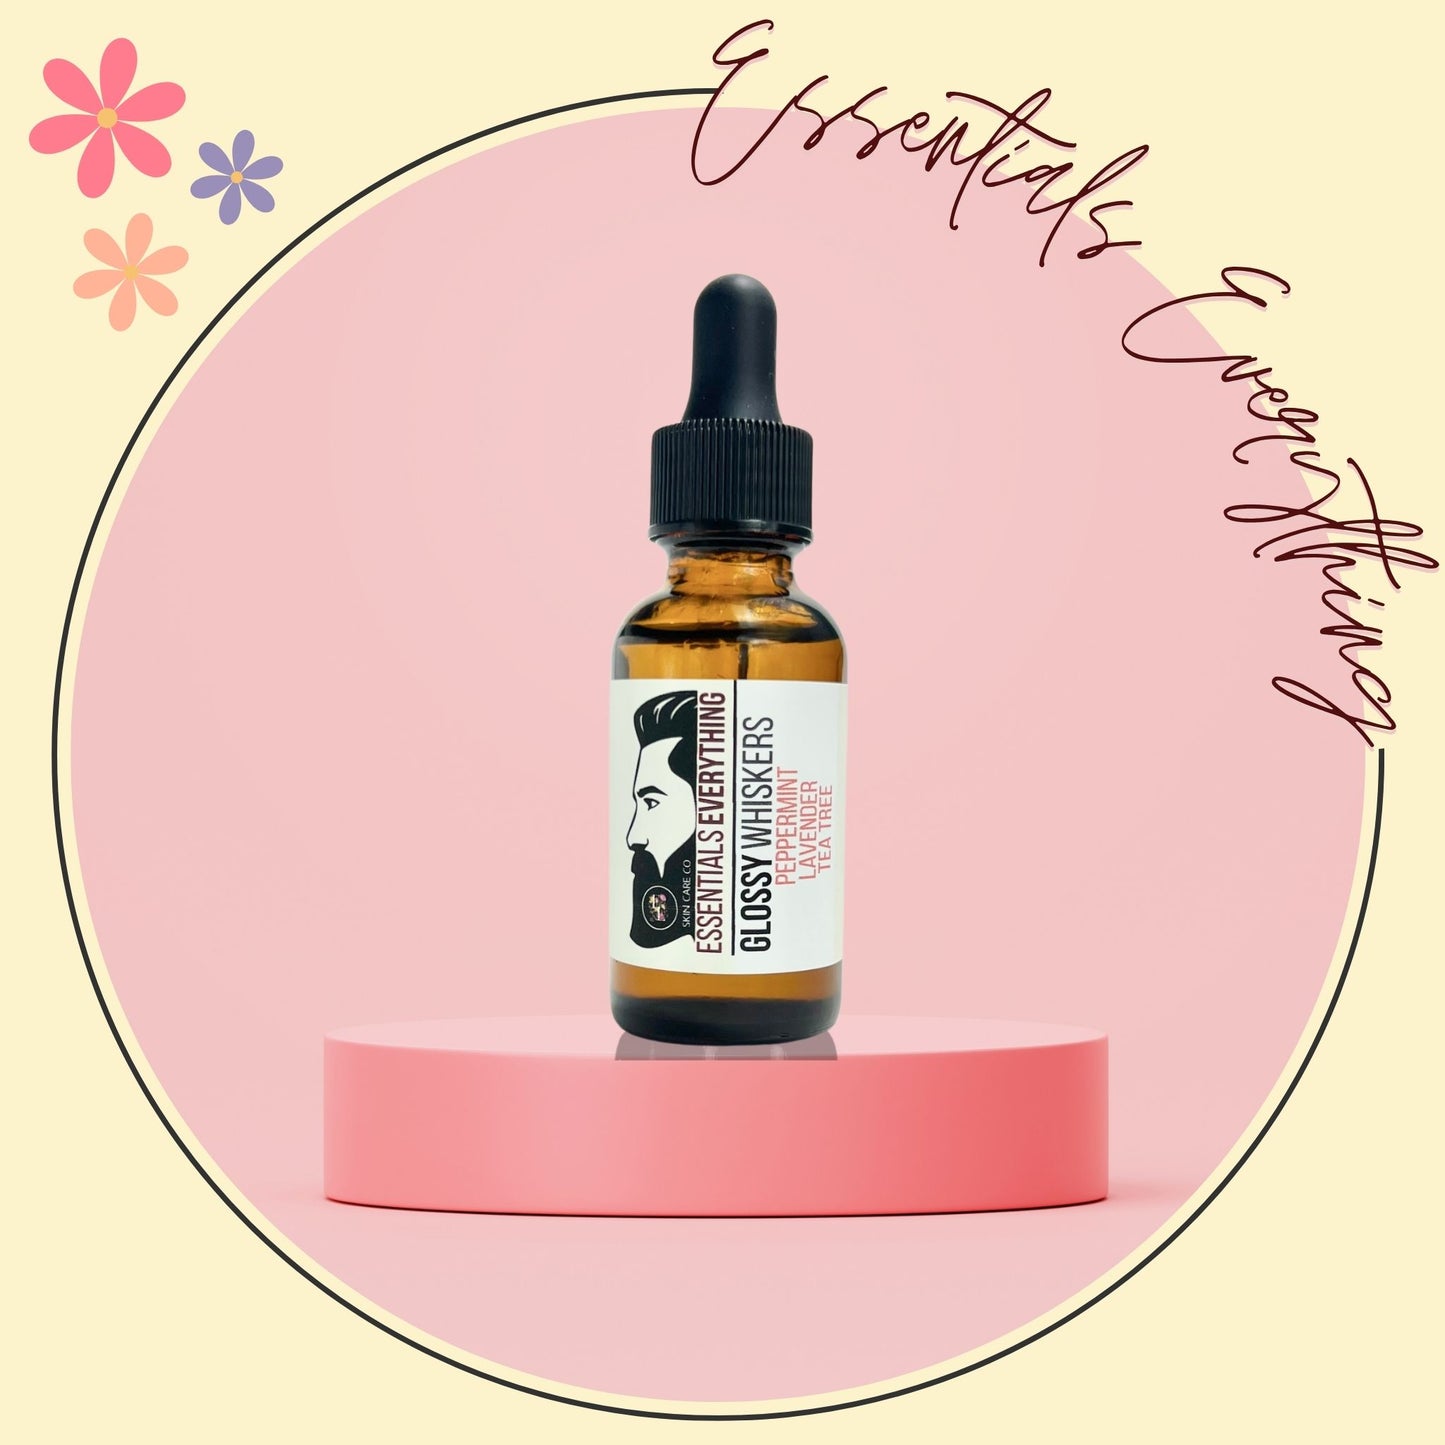 Glossy Whiskers - All-Natural Beard Oil from Essentials Everything Skin Care Co. Peppermint/Tea Tree/Lavender 1 oz.